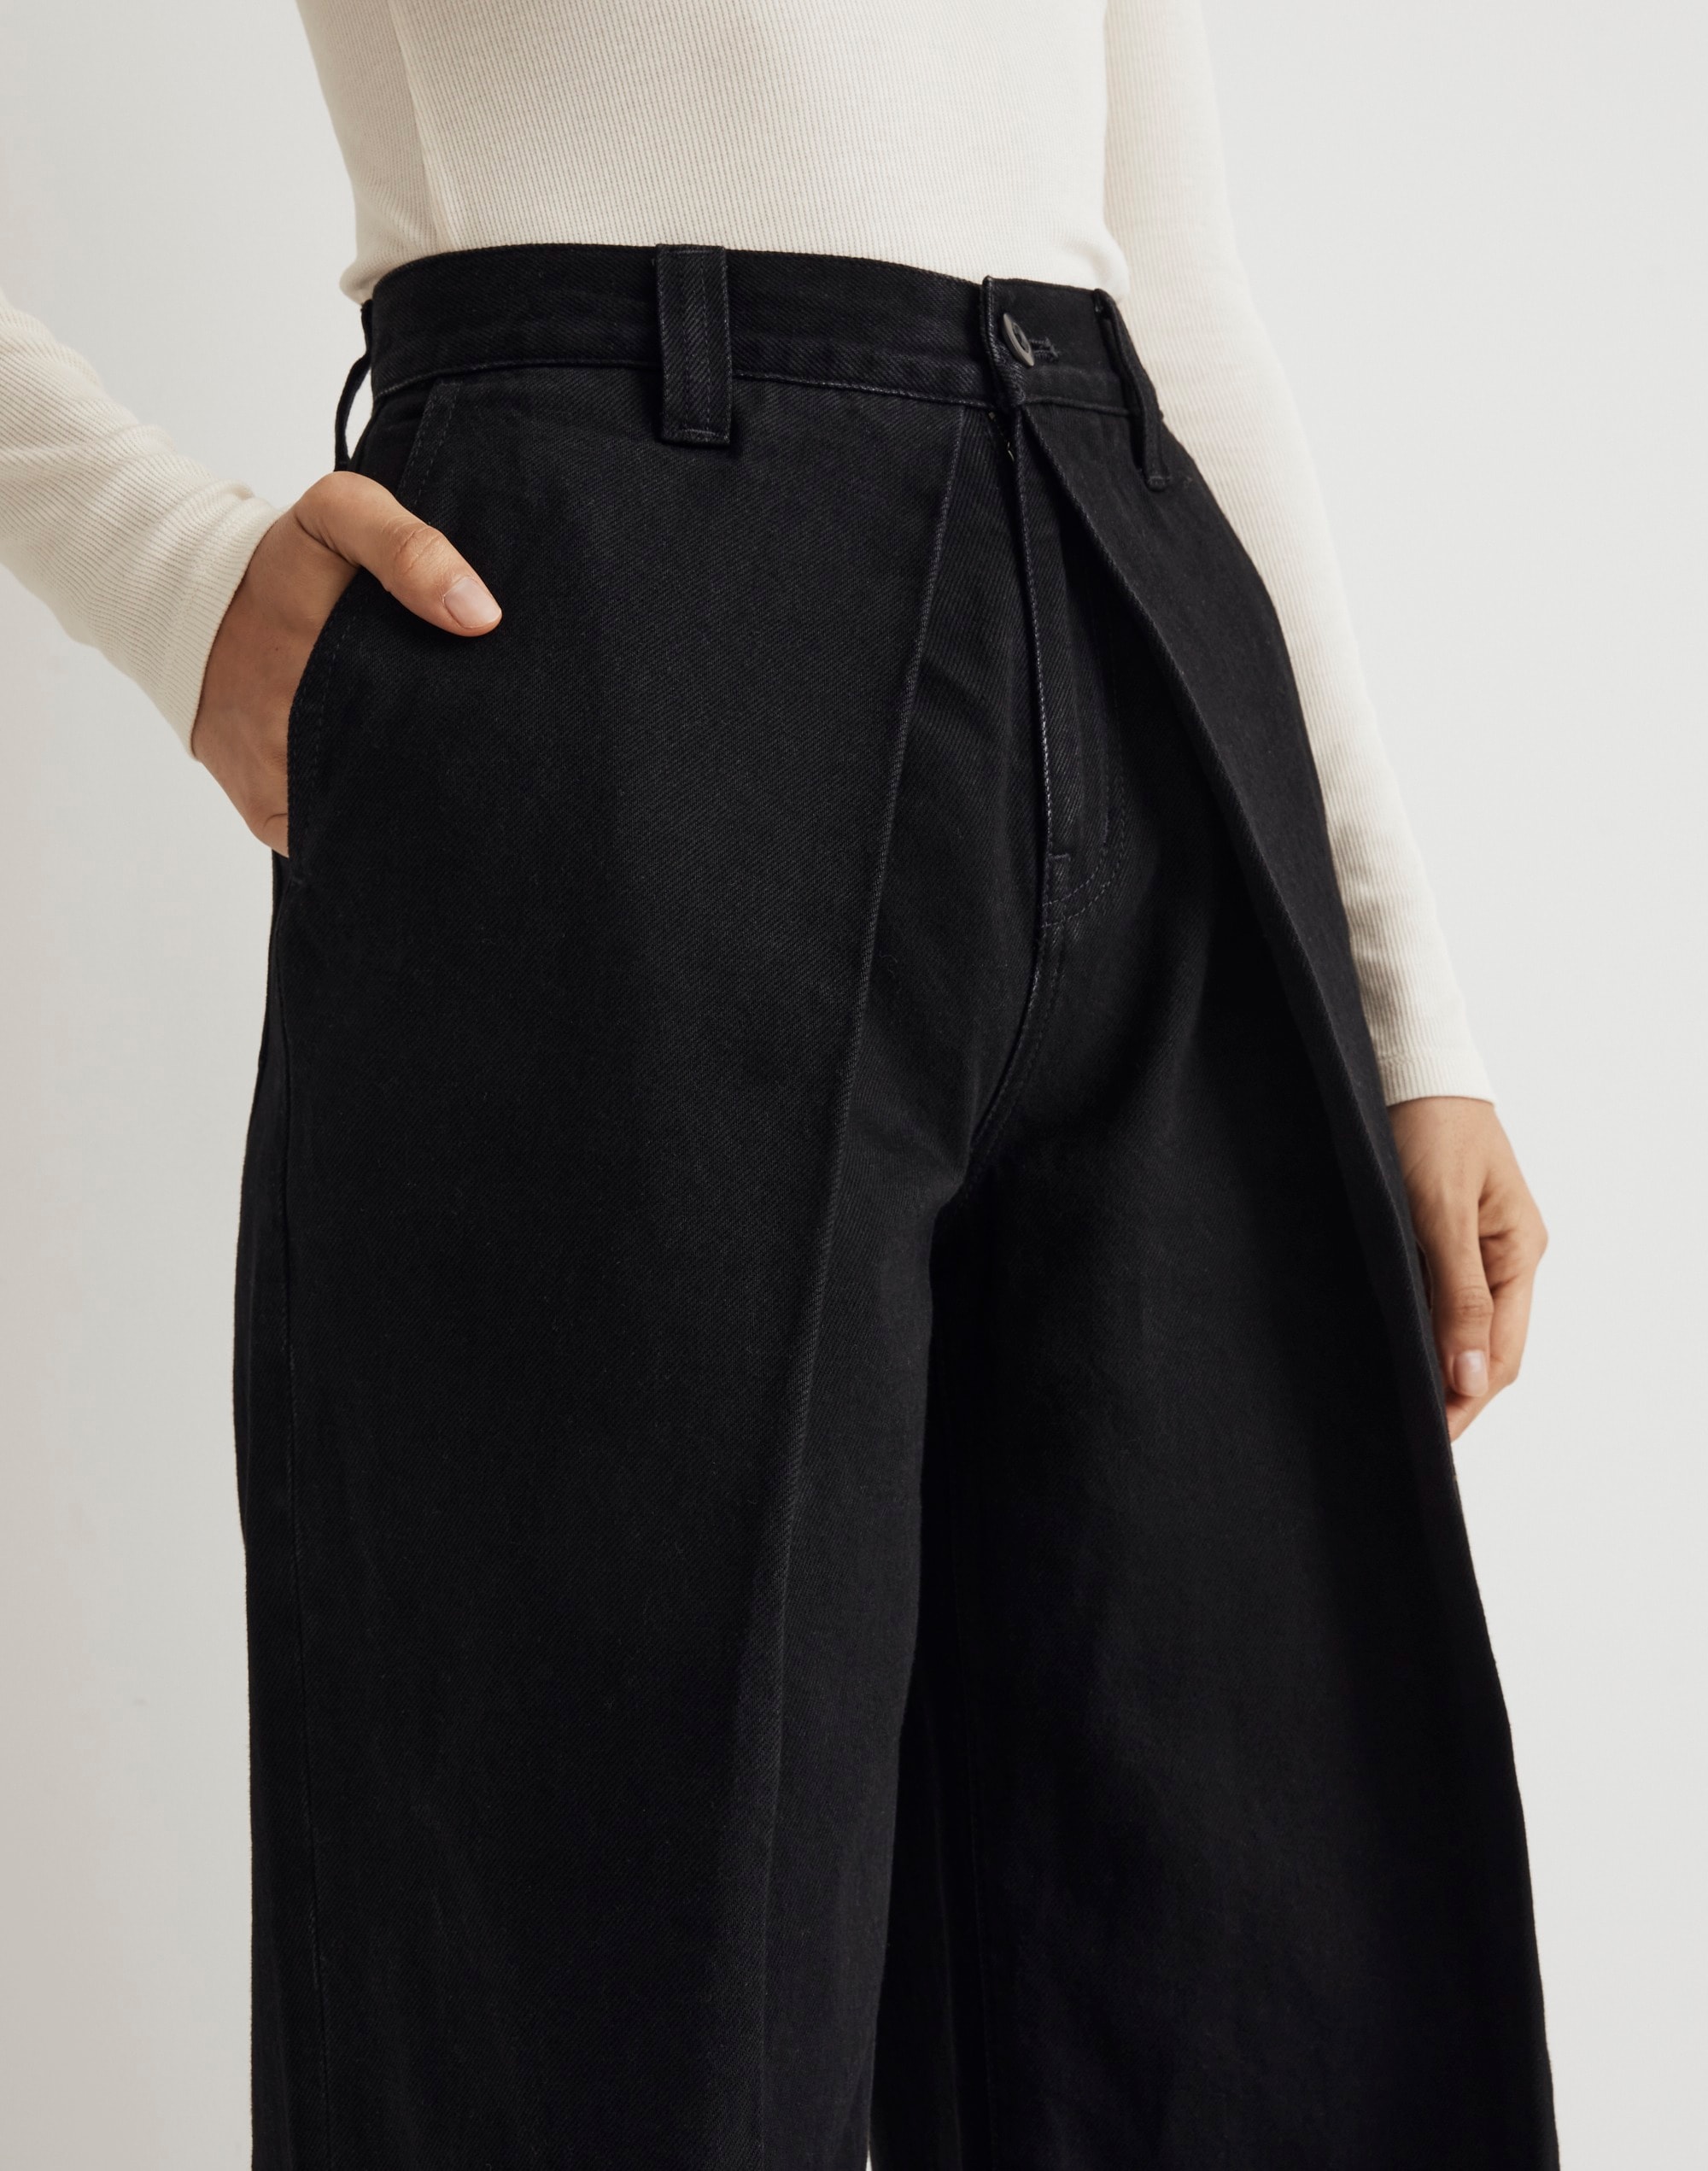 Extrawide-Leg Trouser Jeans Wilkes Wash: Pleat Edition